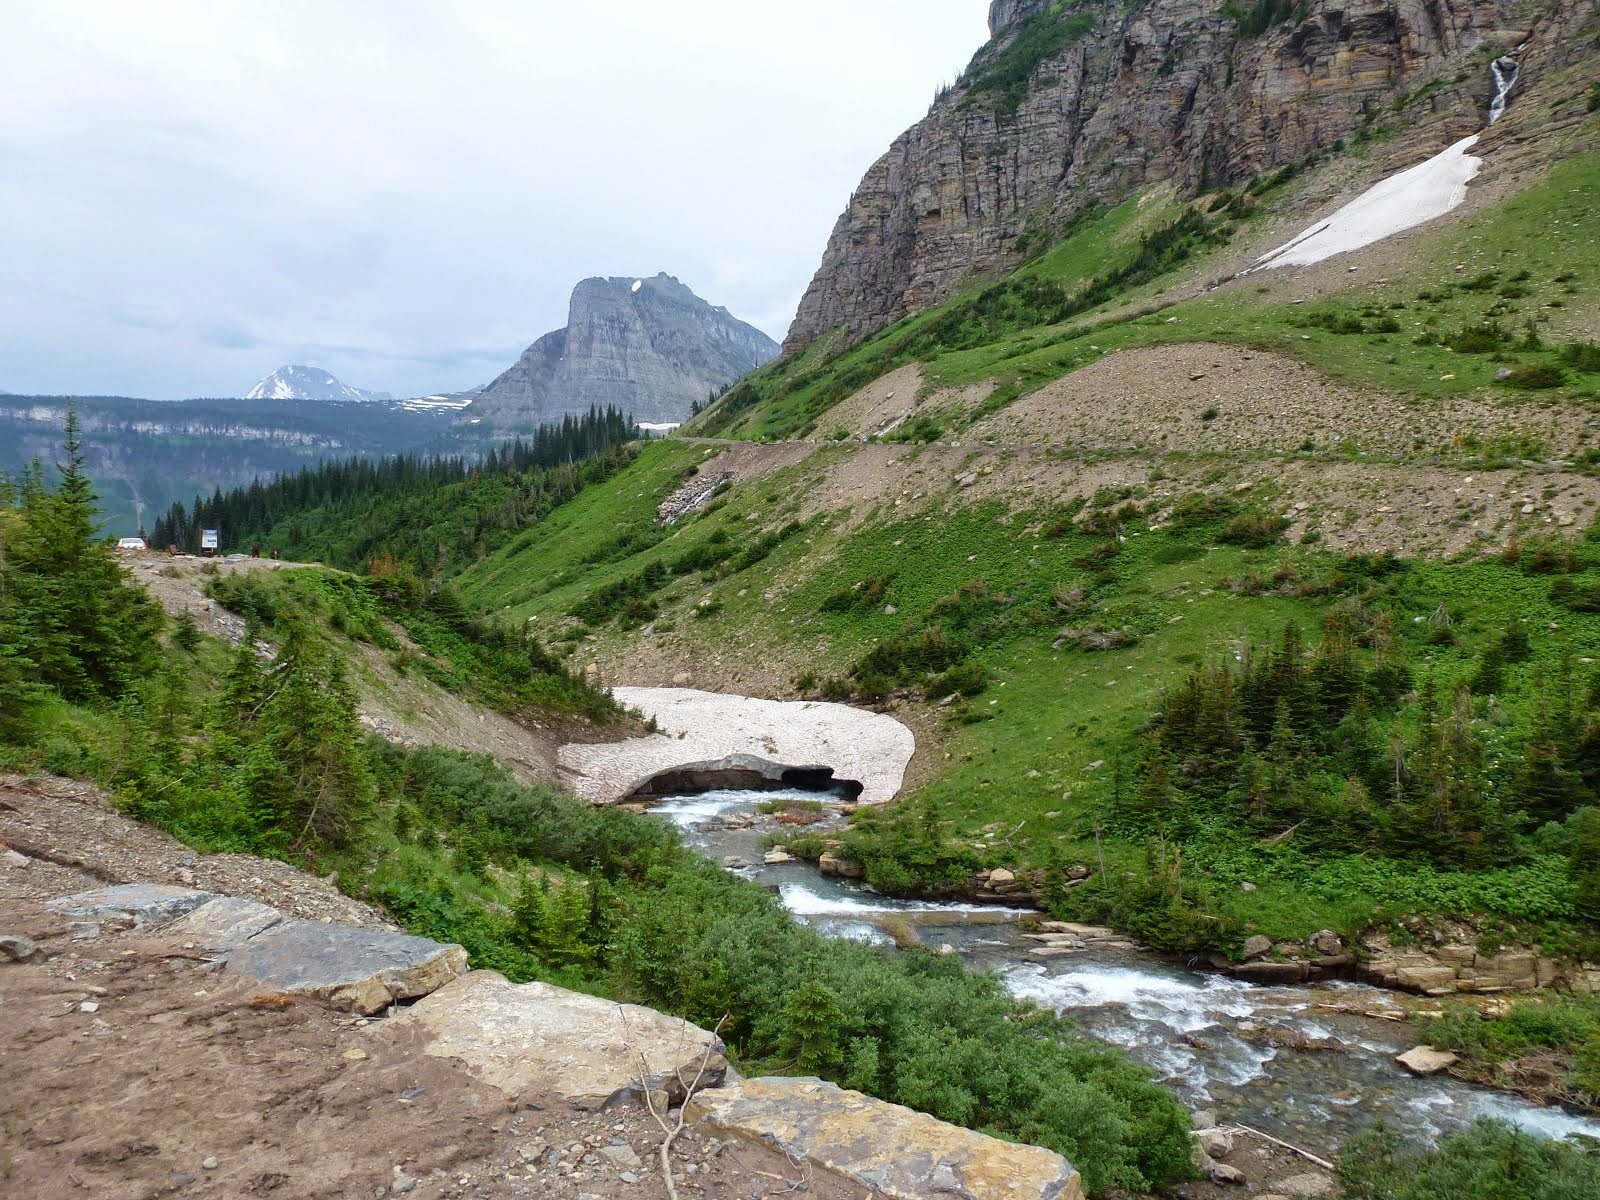 My Favourite Location on Earth - Glacier National Park